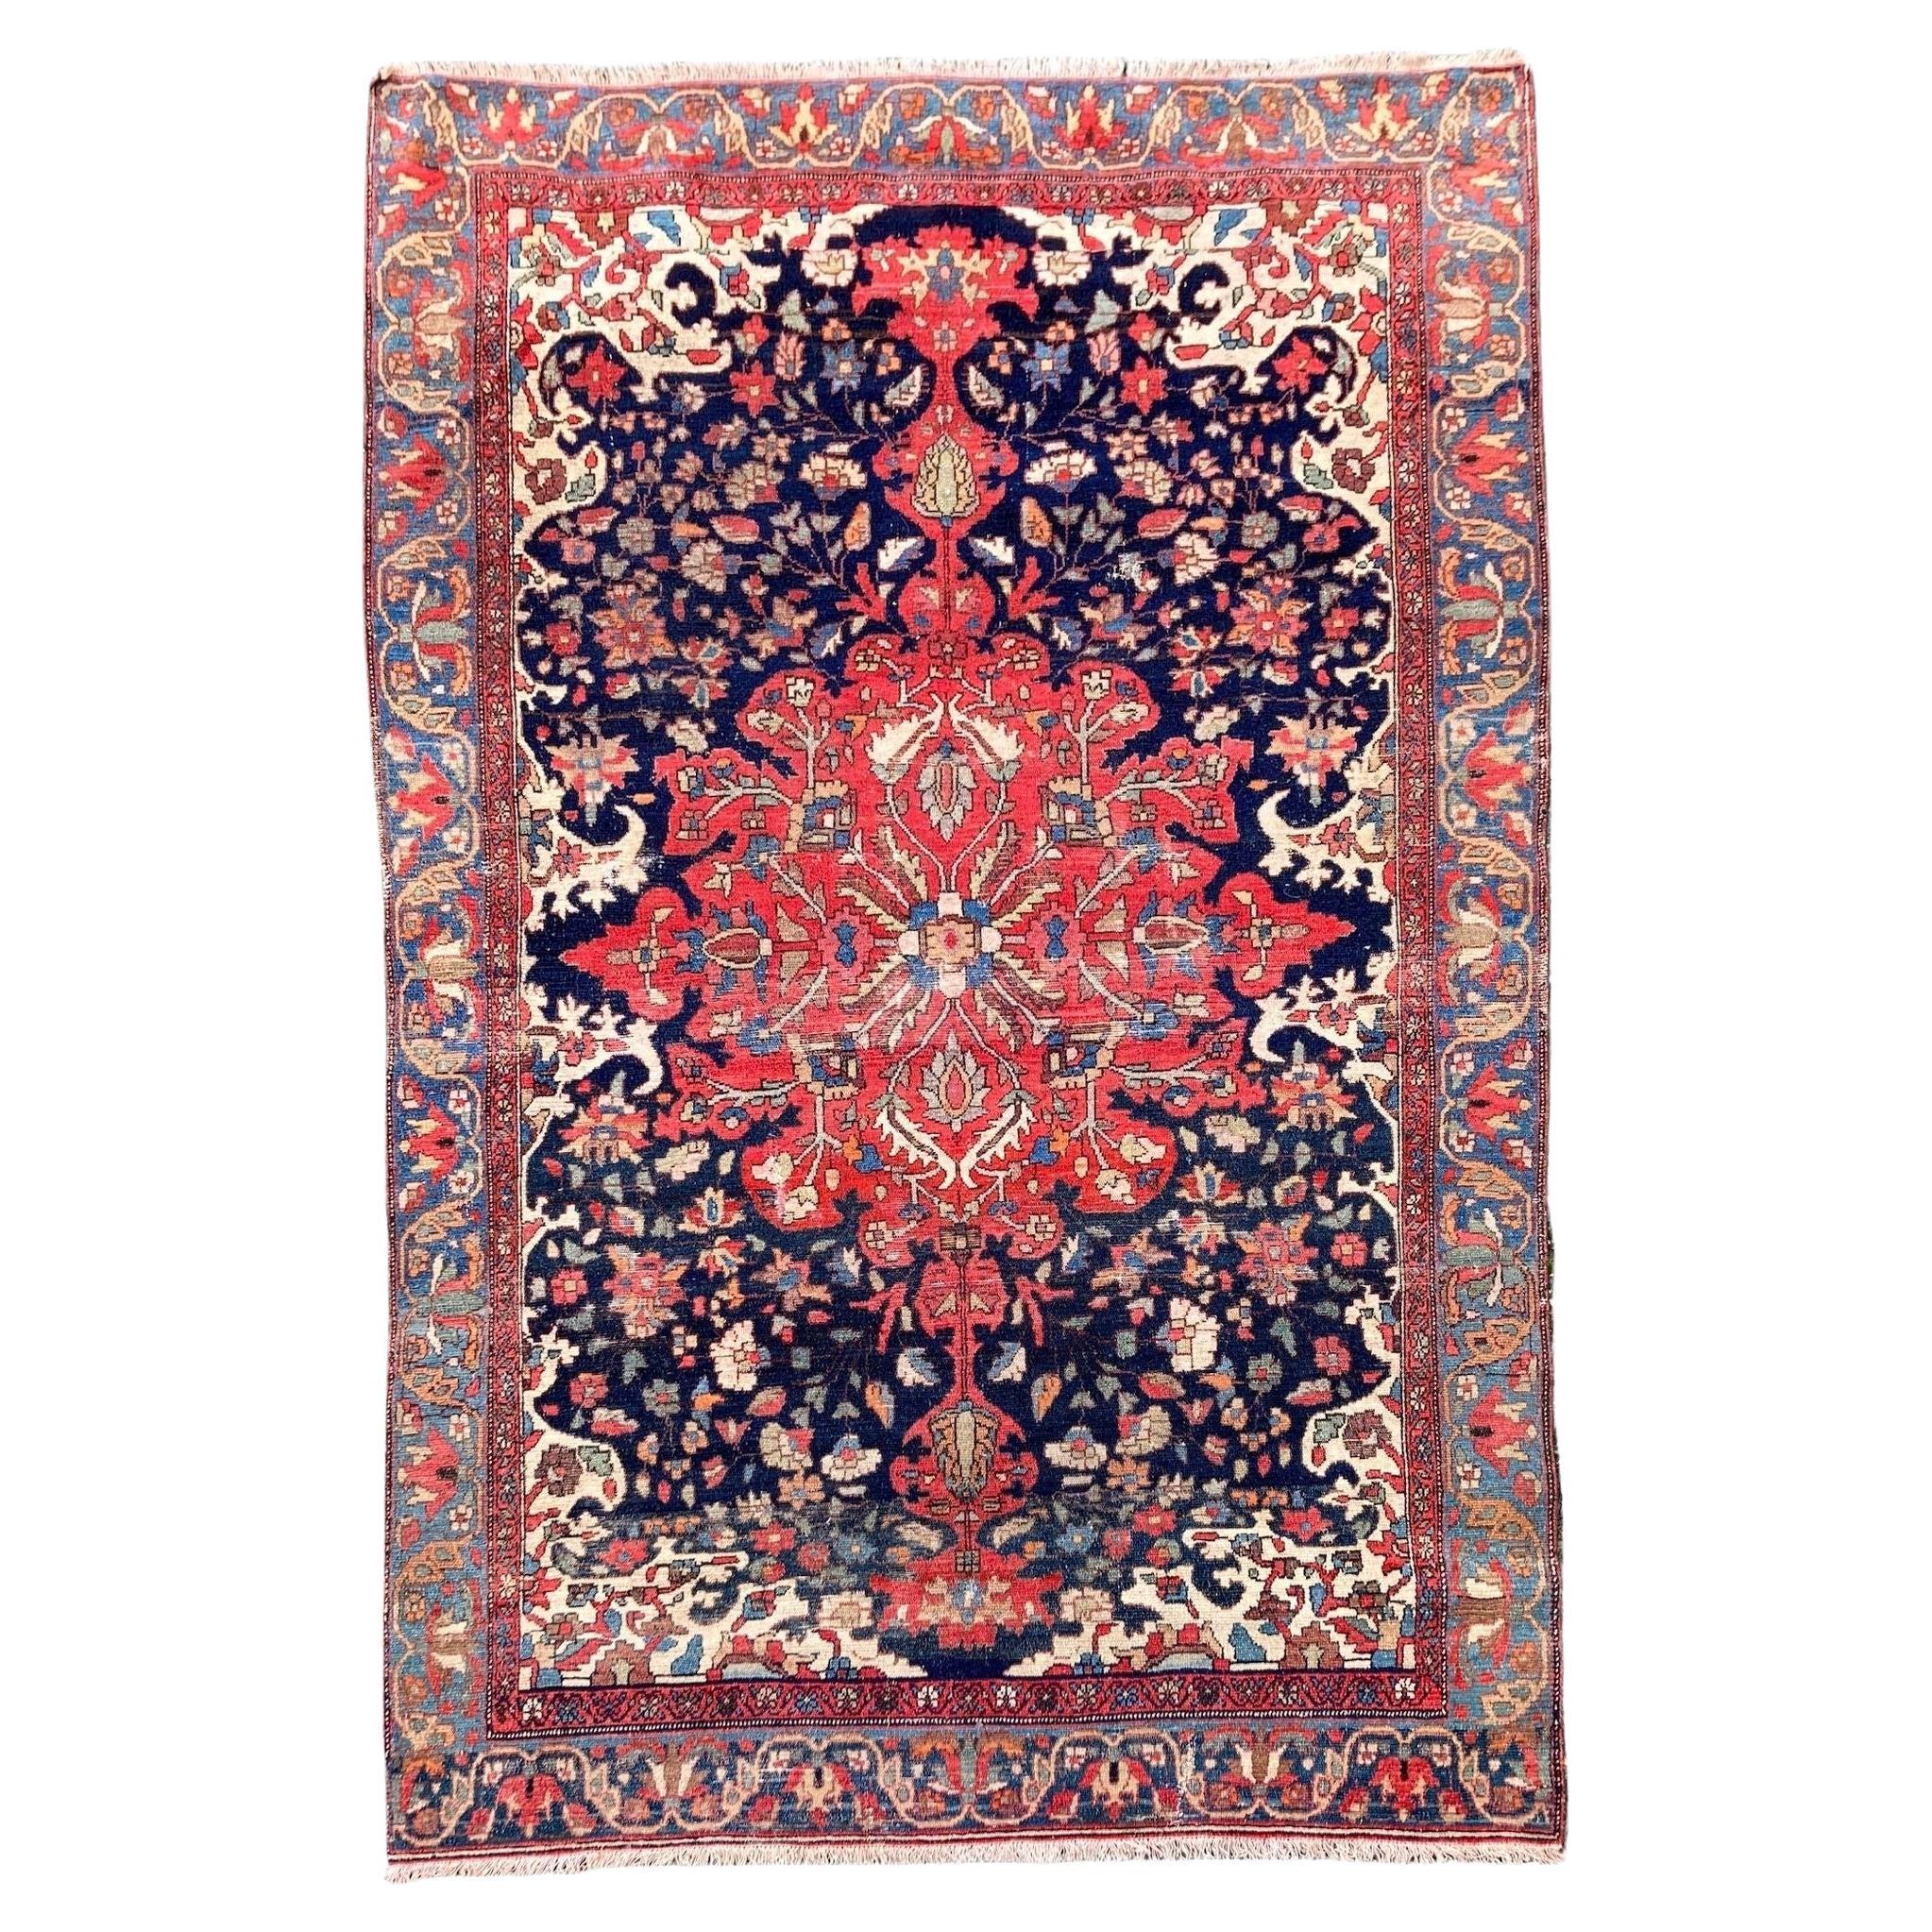 Antique Malayer Rug 1.78m x 1.19m For Sale